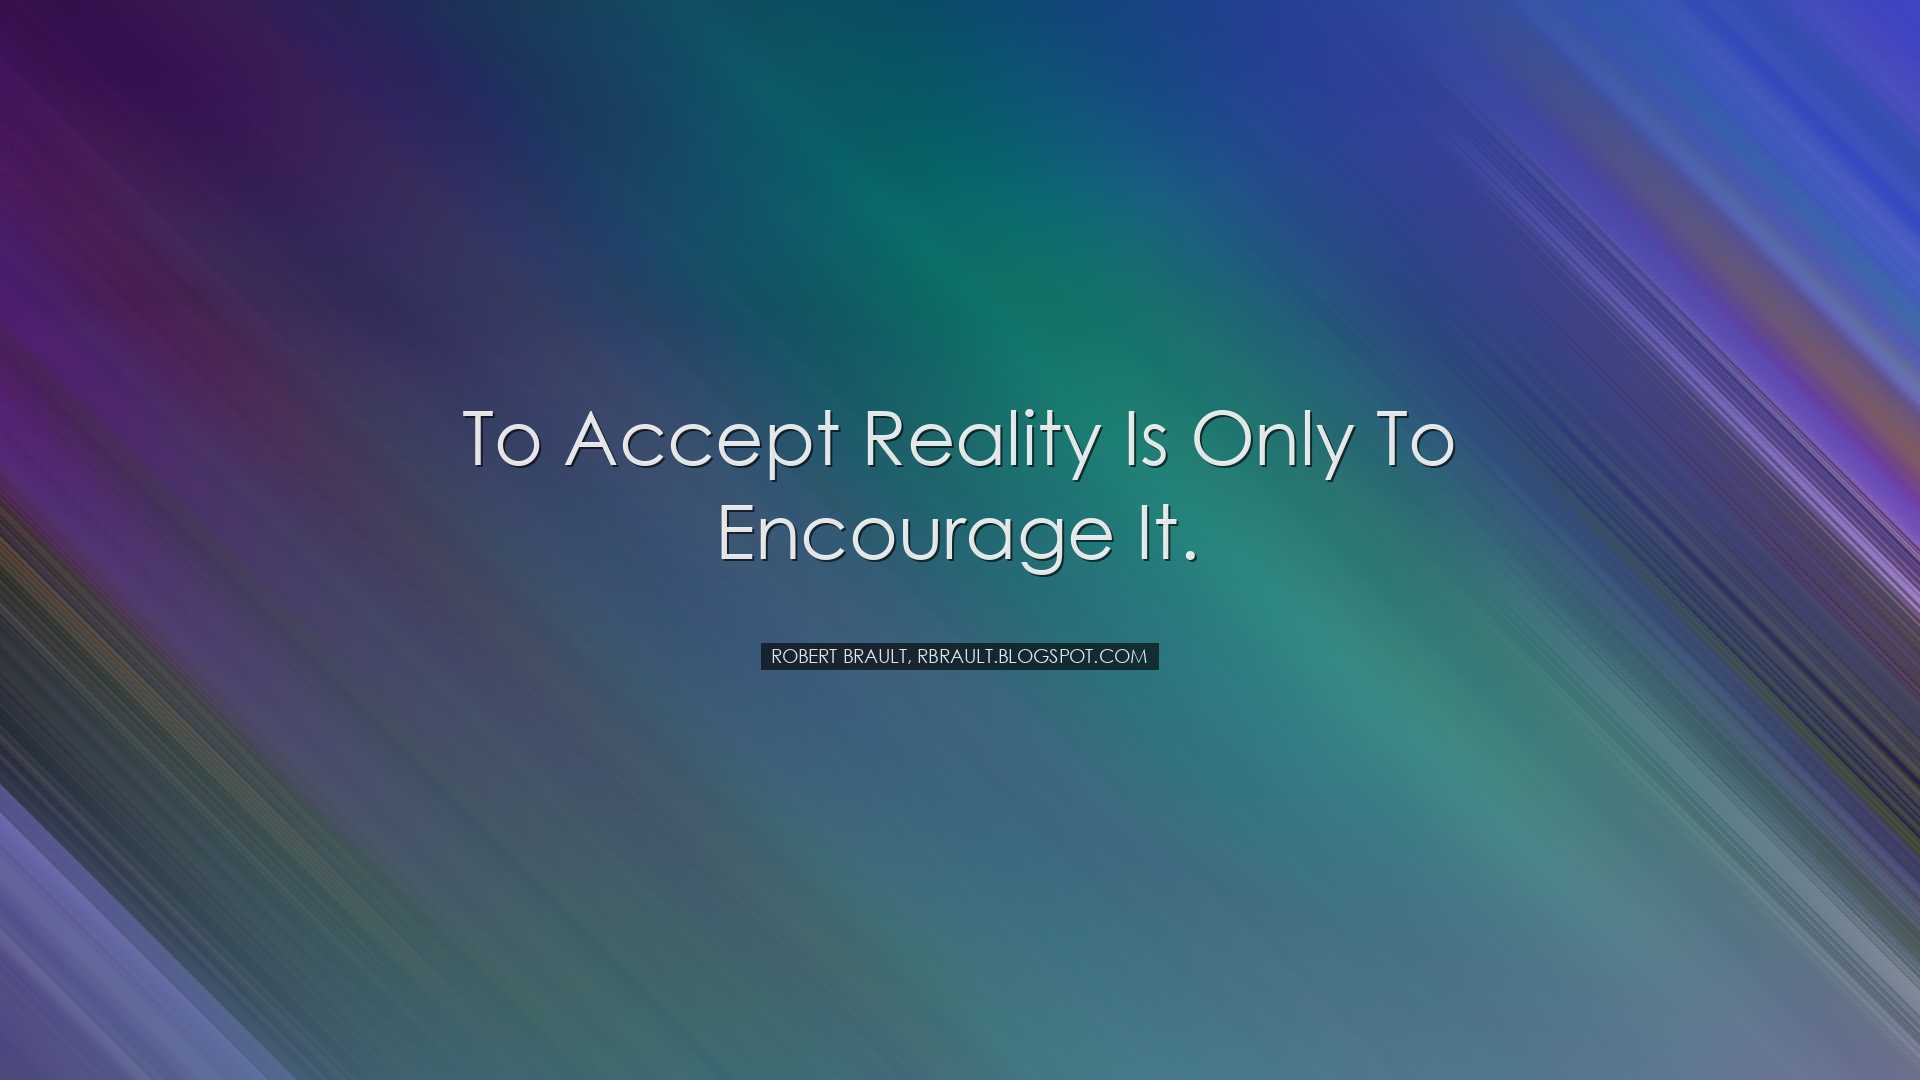 To accept reality is only to encourage it. - Robert Brault, rbraul